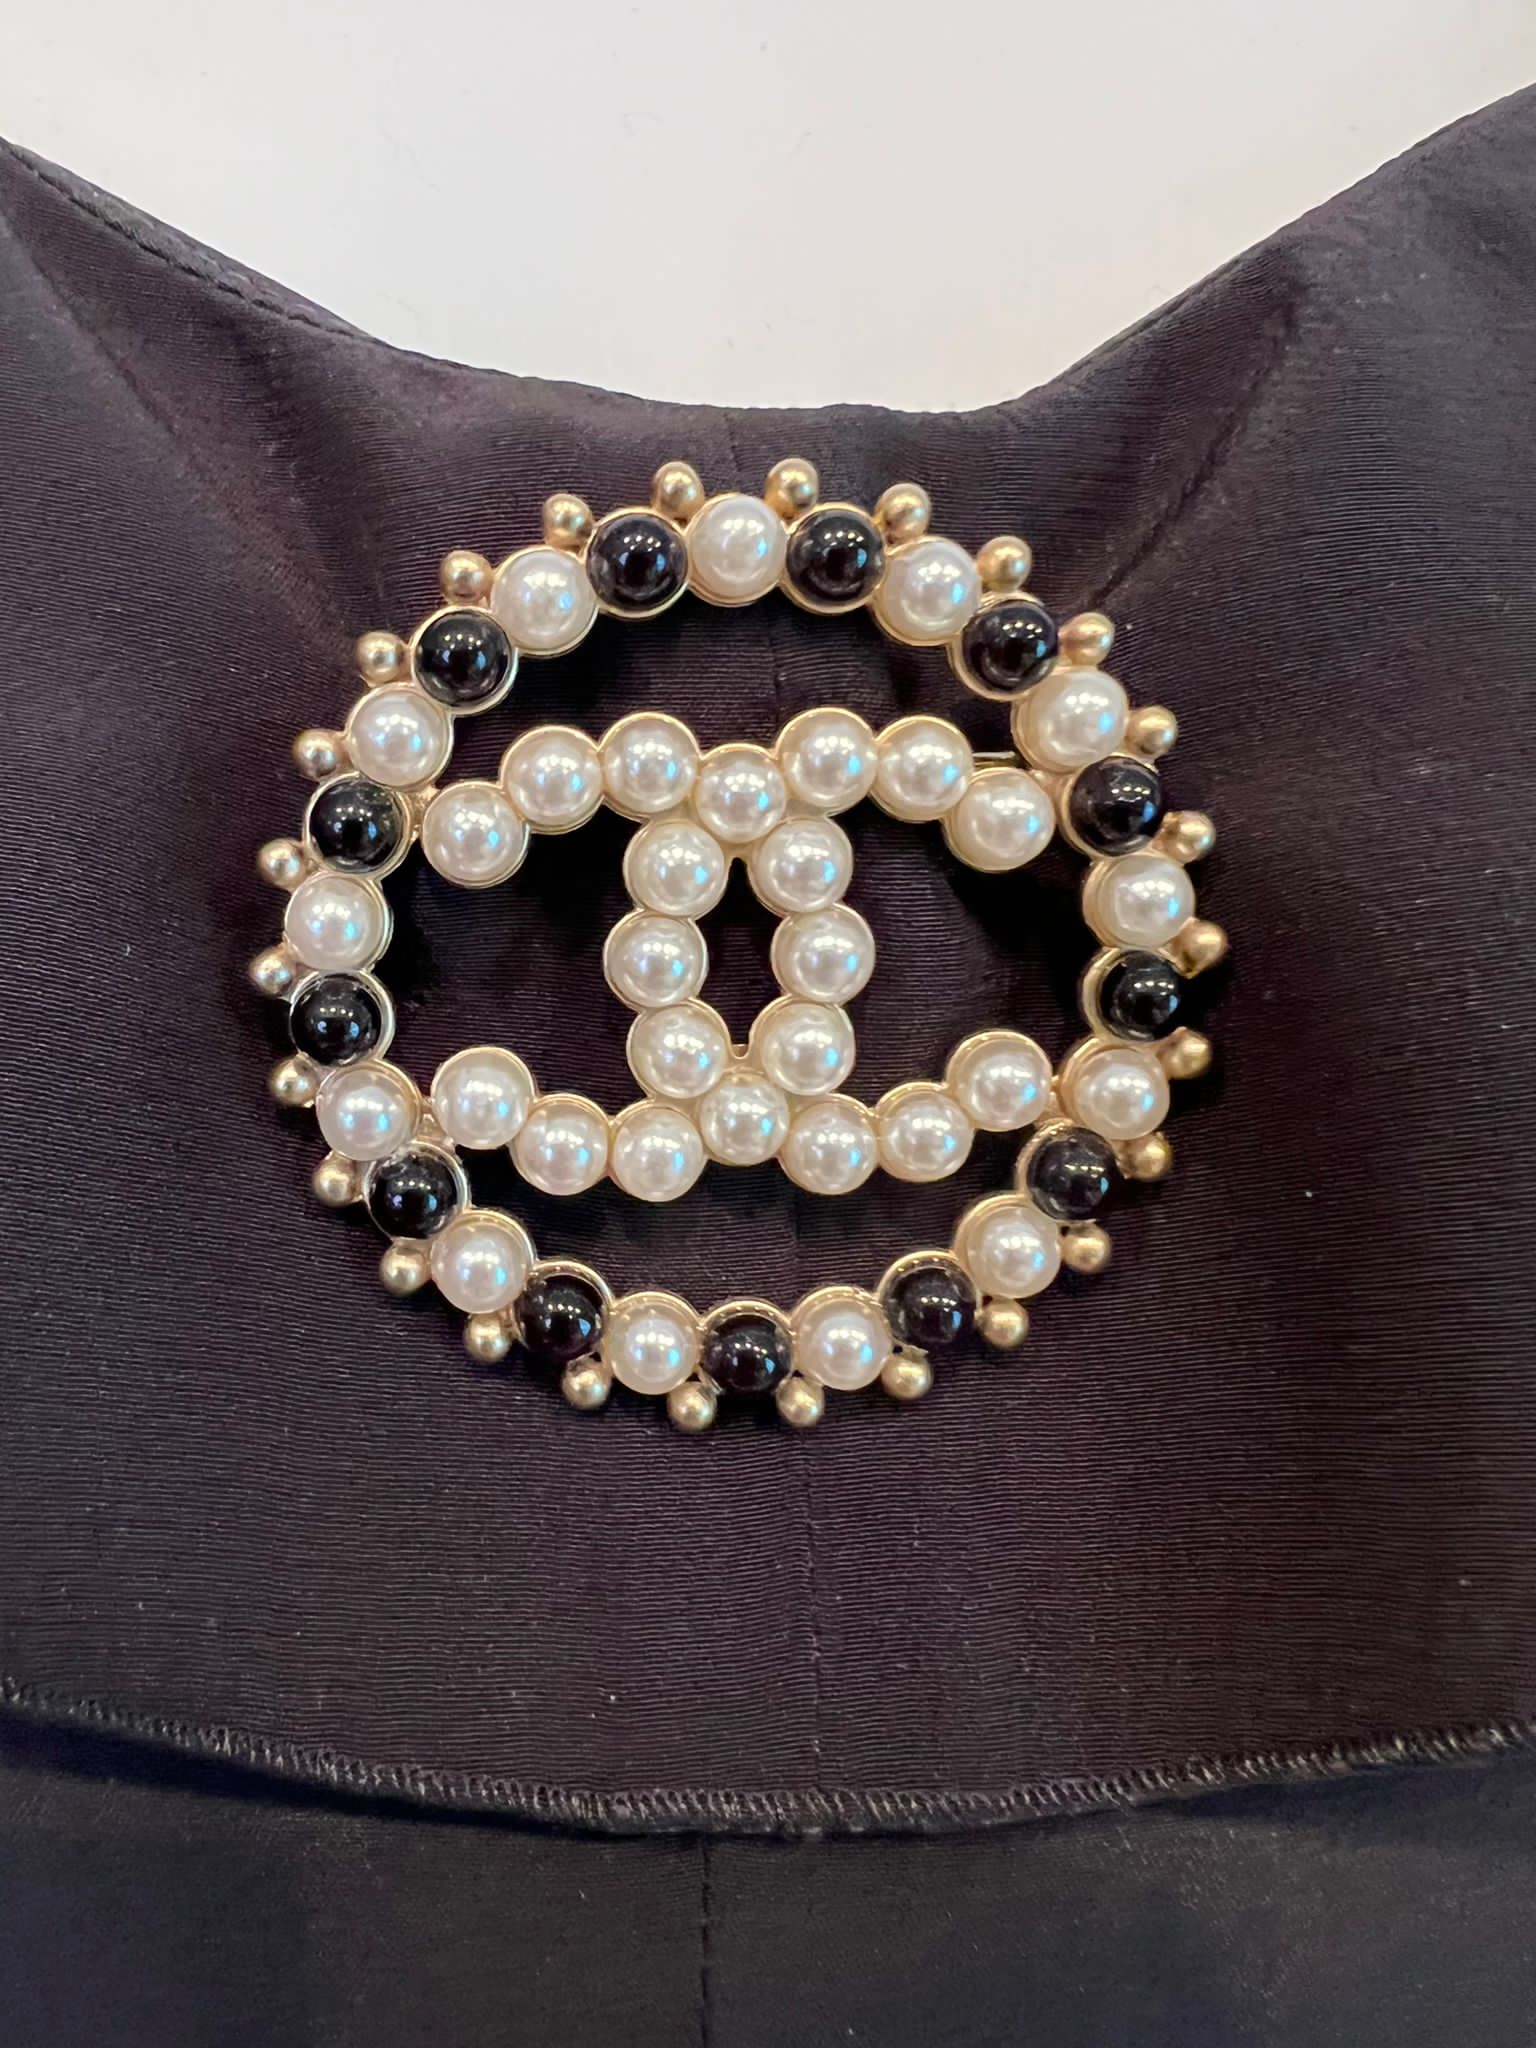 CHANEL SILVER CC LOGO WHITE CRYSTALS PEARLS LARGE BROOCH PIN - ShopperBoard